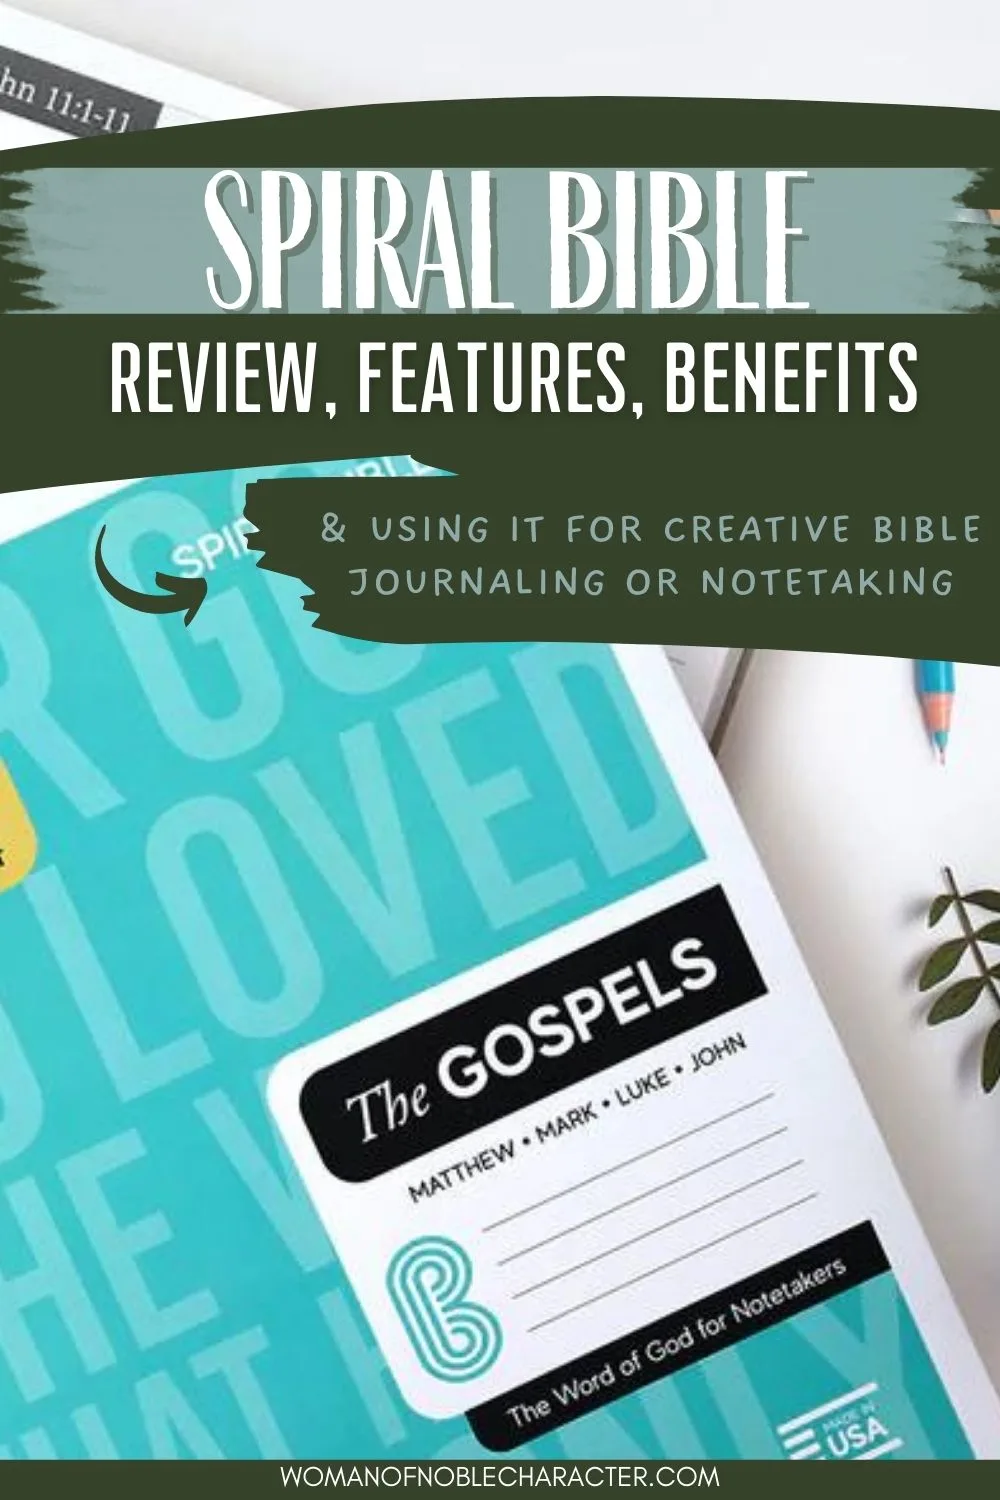 image of cover of Spiral Bible with the text Spiral Bible review, features benefits and using it for creative Bible journaling or notetaking